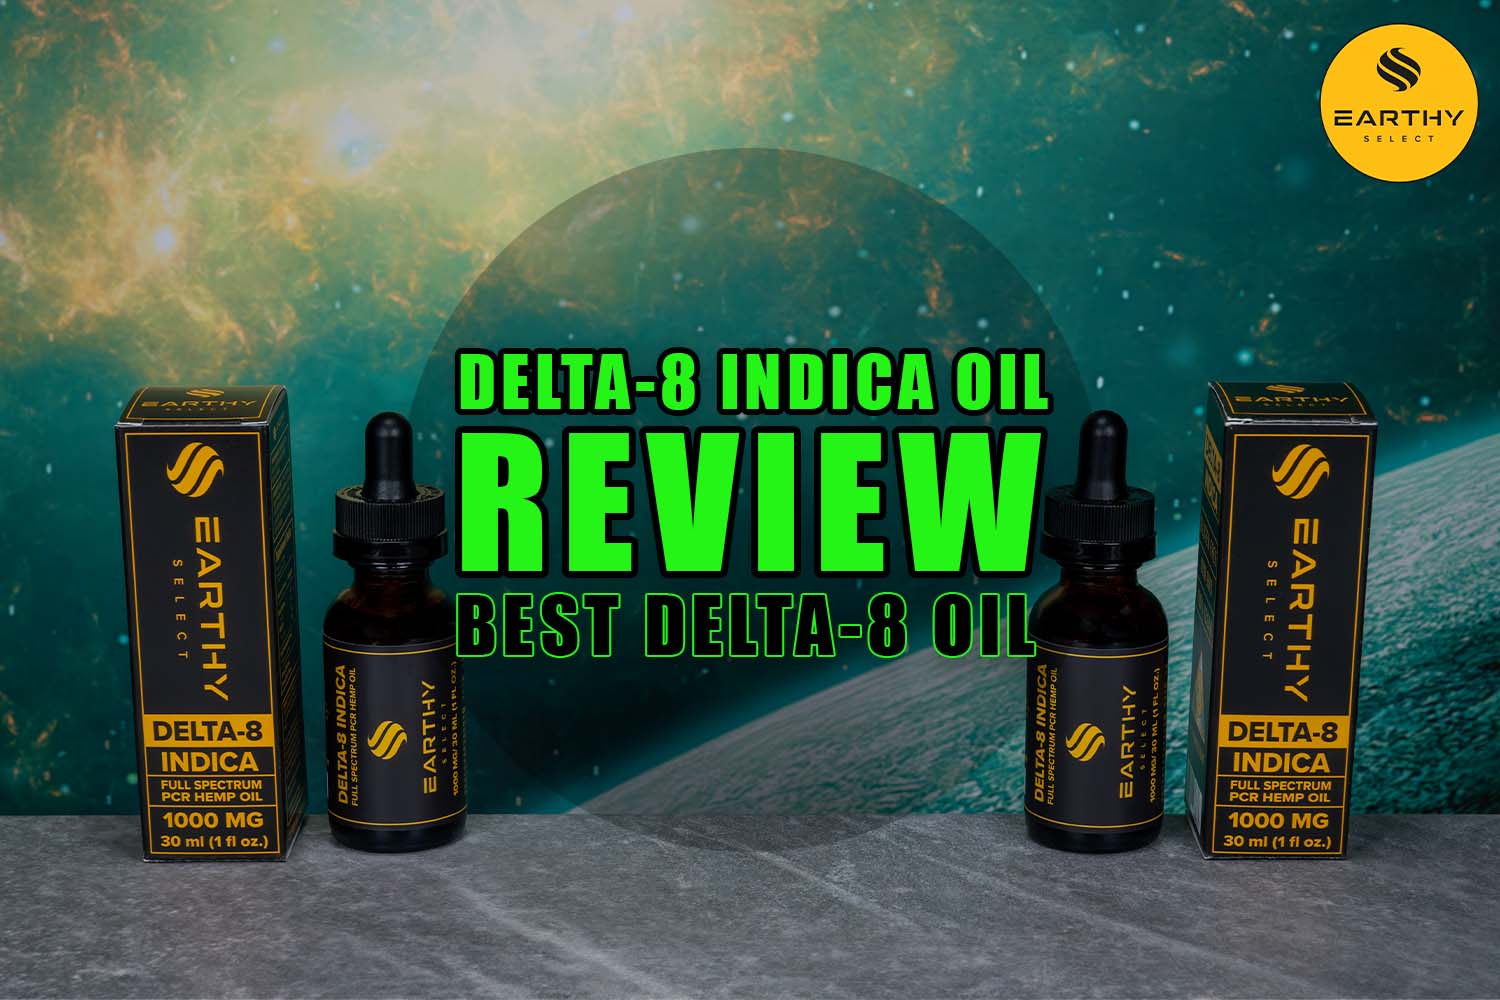 Delta-8 Indica Oil Review: Best Delta-8 Oil Tinctures. Earthy Select